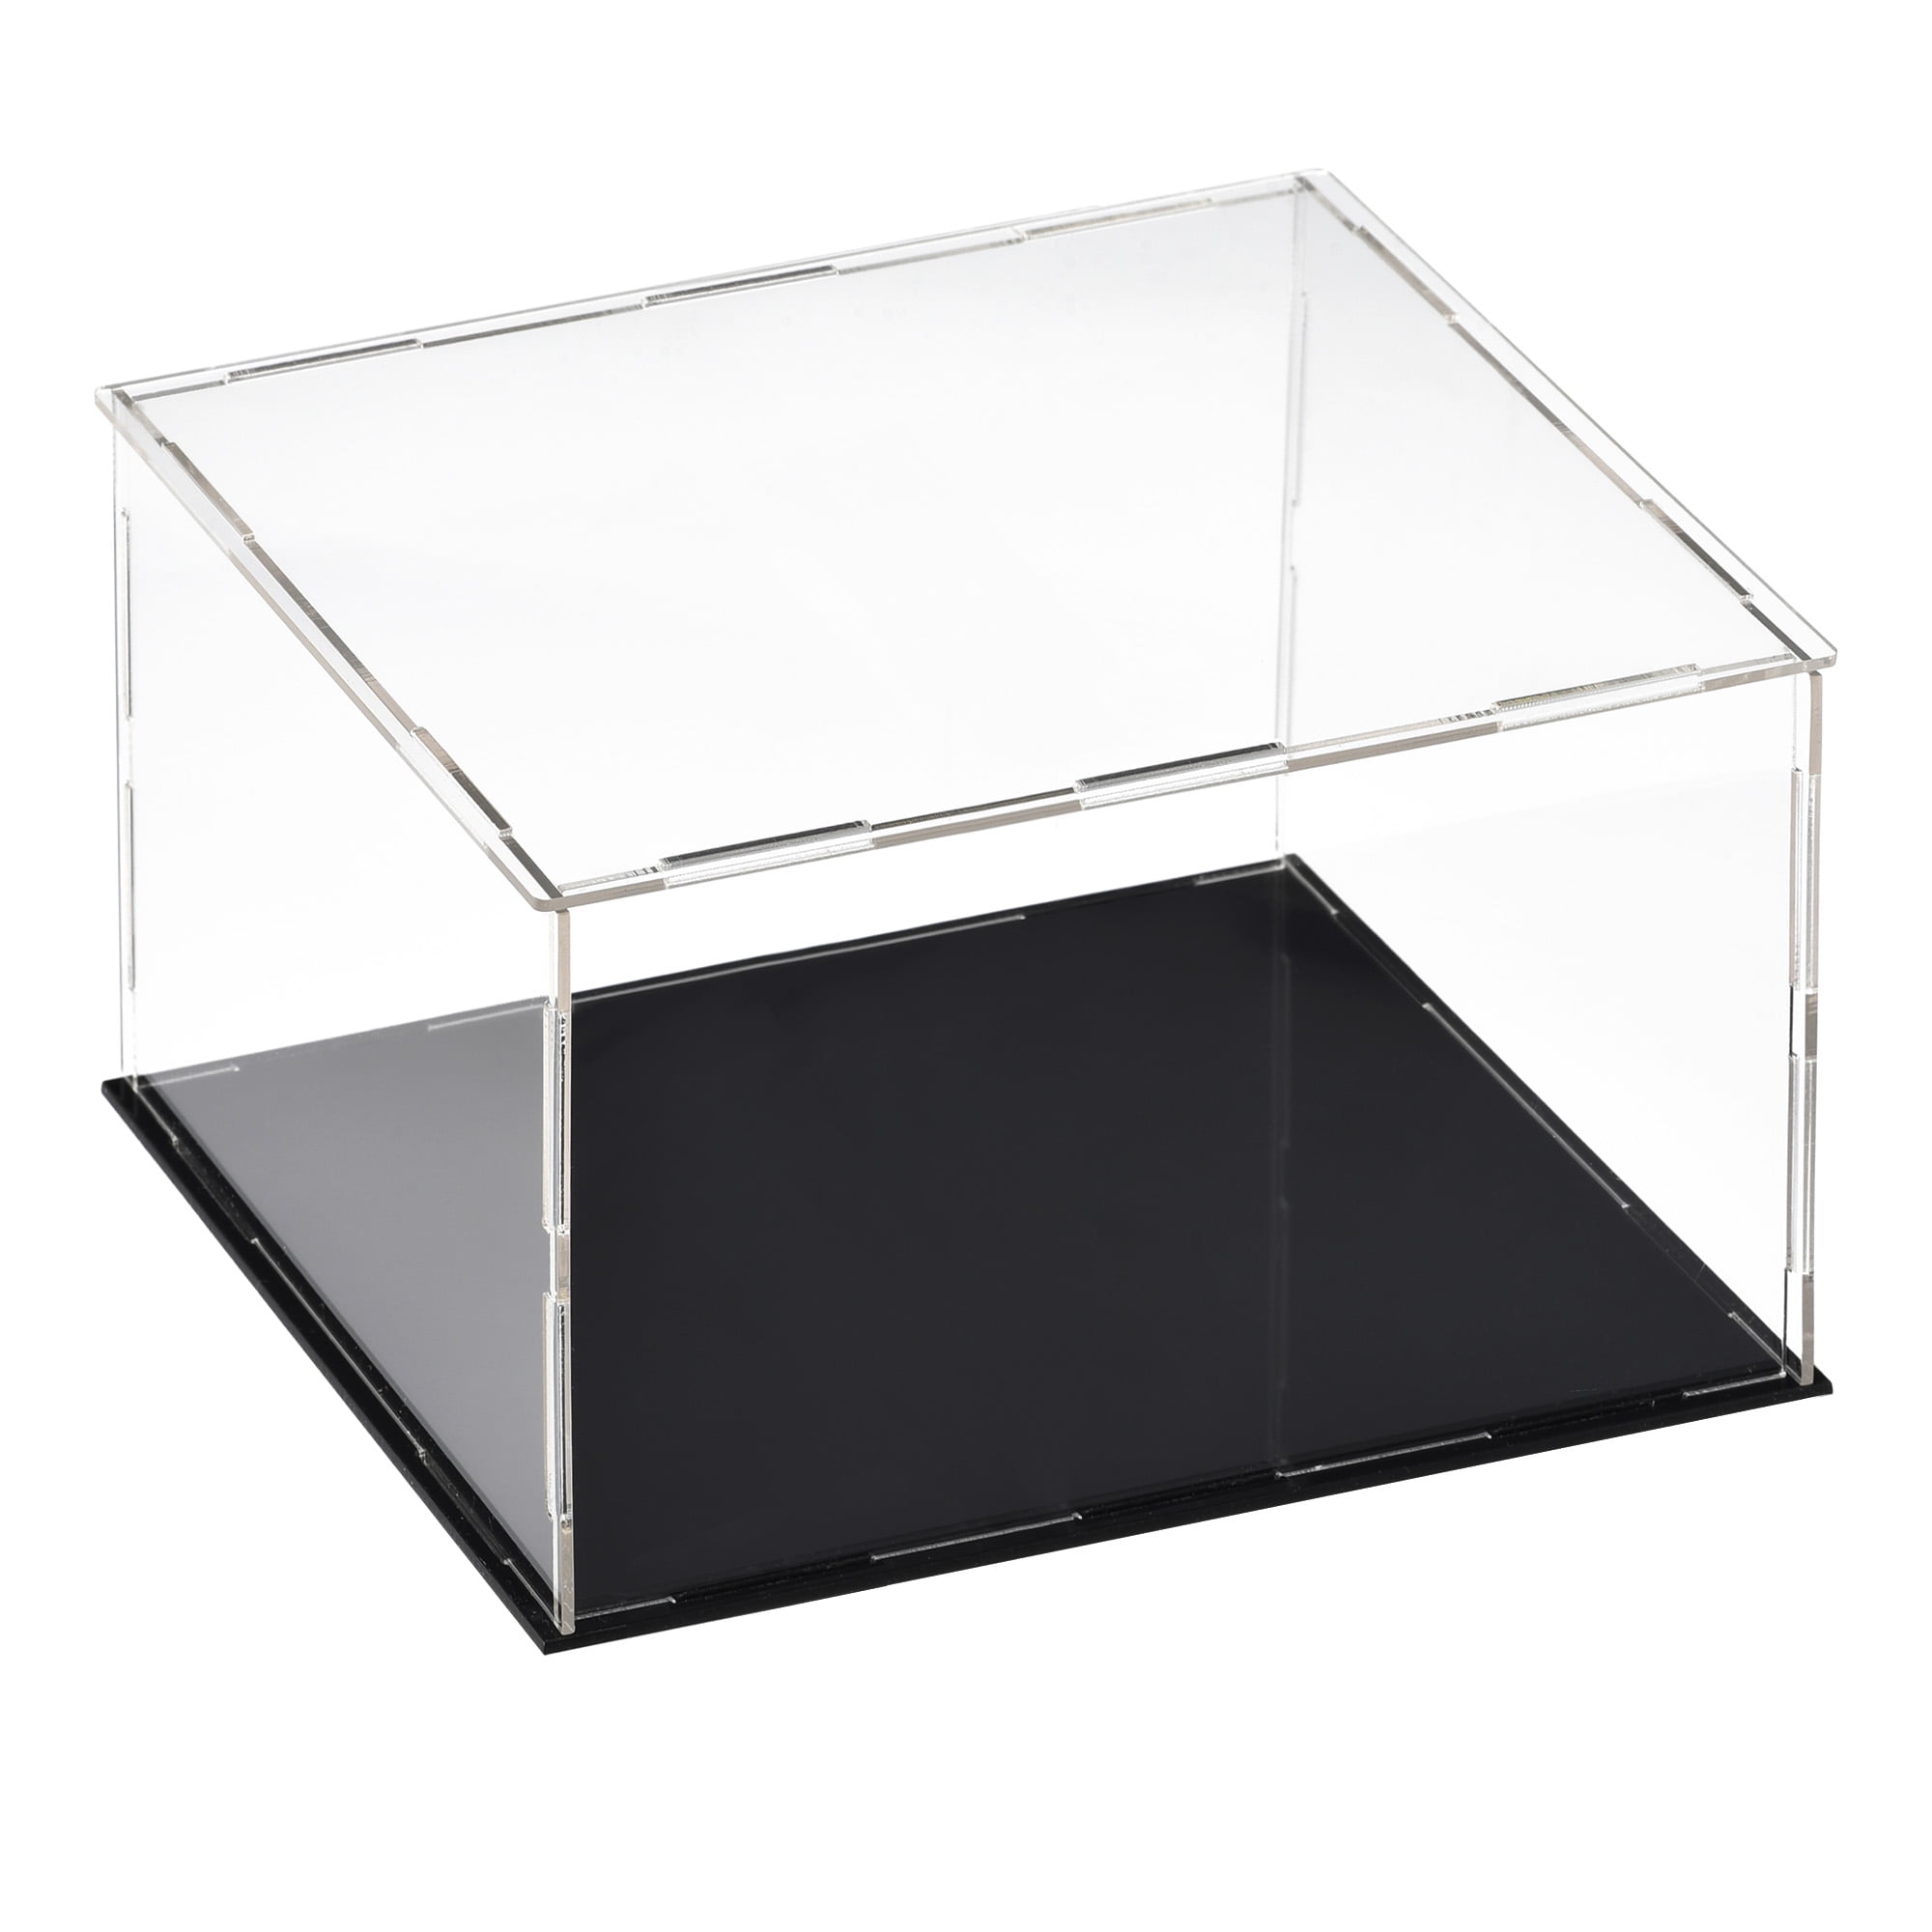 Clear Acrylic Dustproof Protection Storage Box Cube Display Box Show Case 16cm 